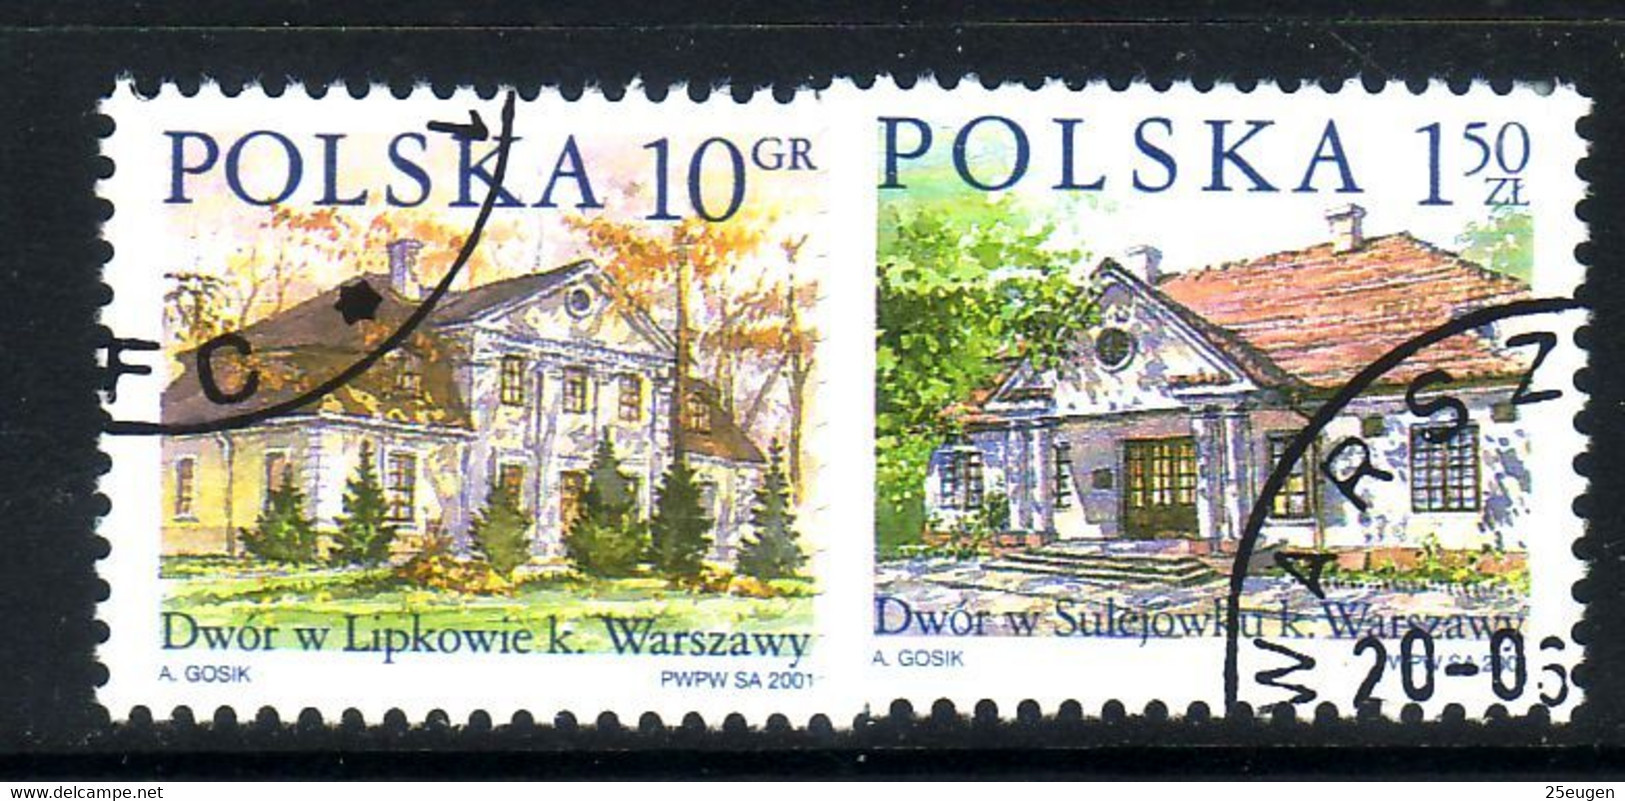 POLAND 2001 MICHEL No: 3890-91 USED - Used Stamps